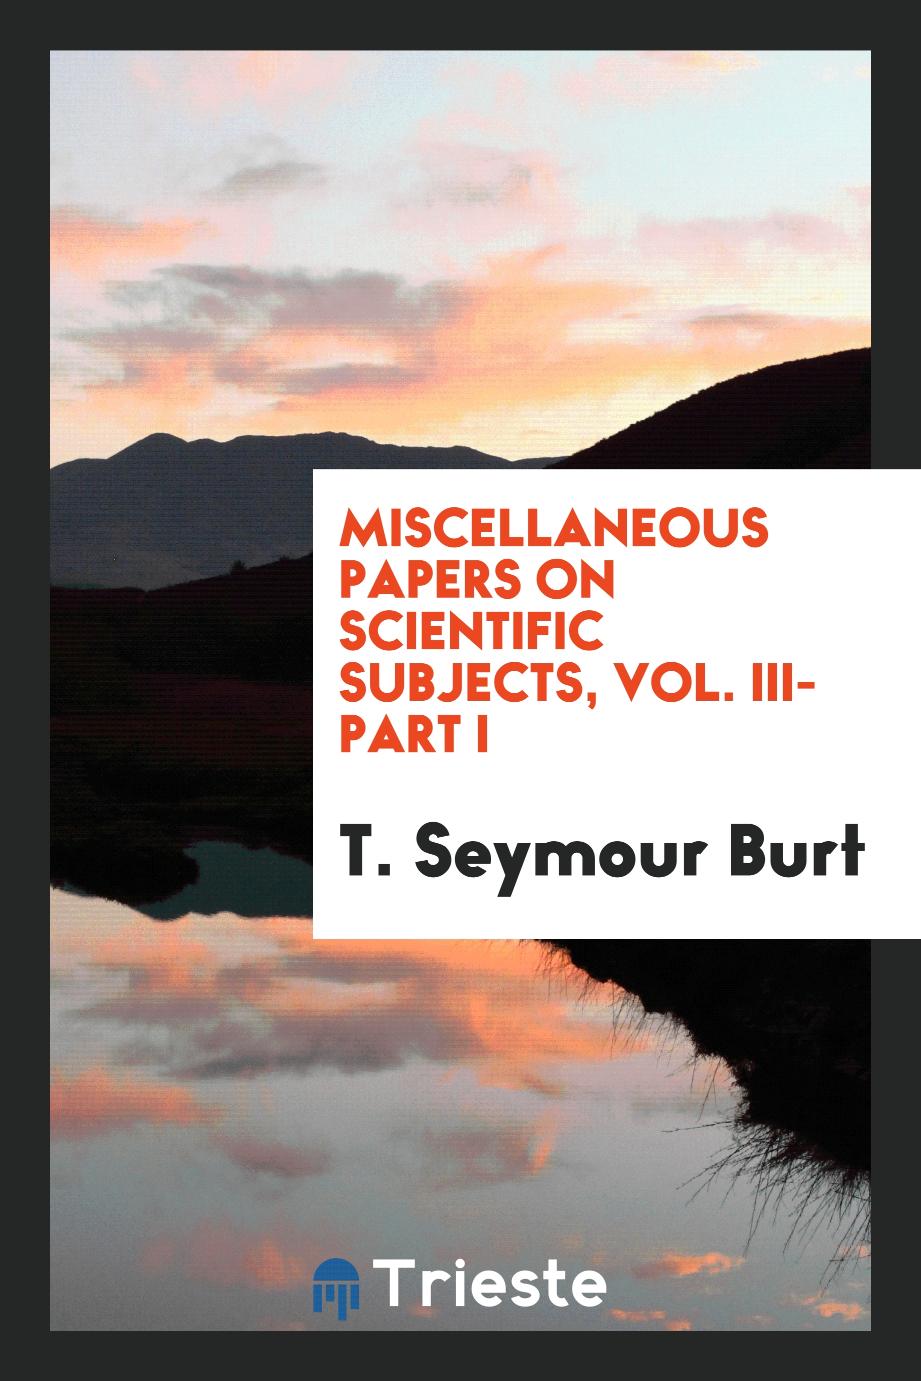 Miscellaneous papers on scientific subjects, Vol. III-Part I